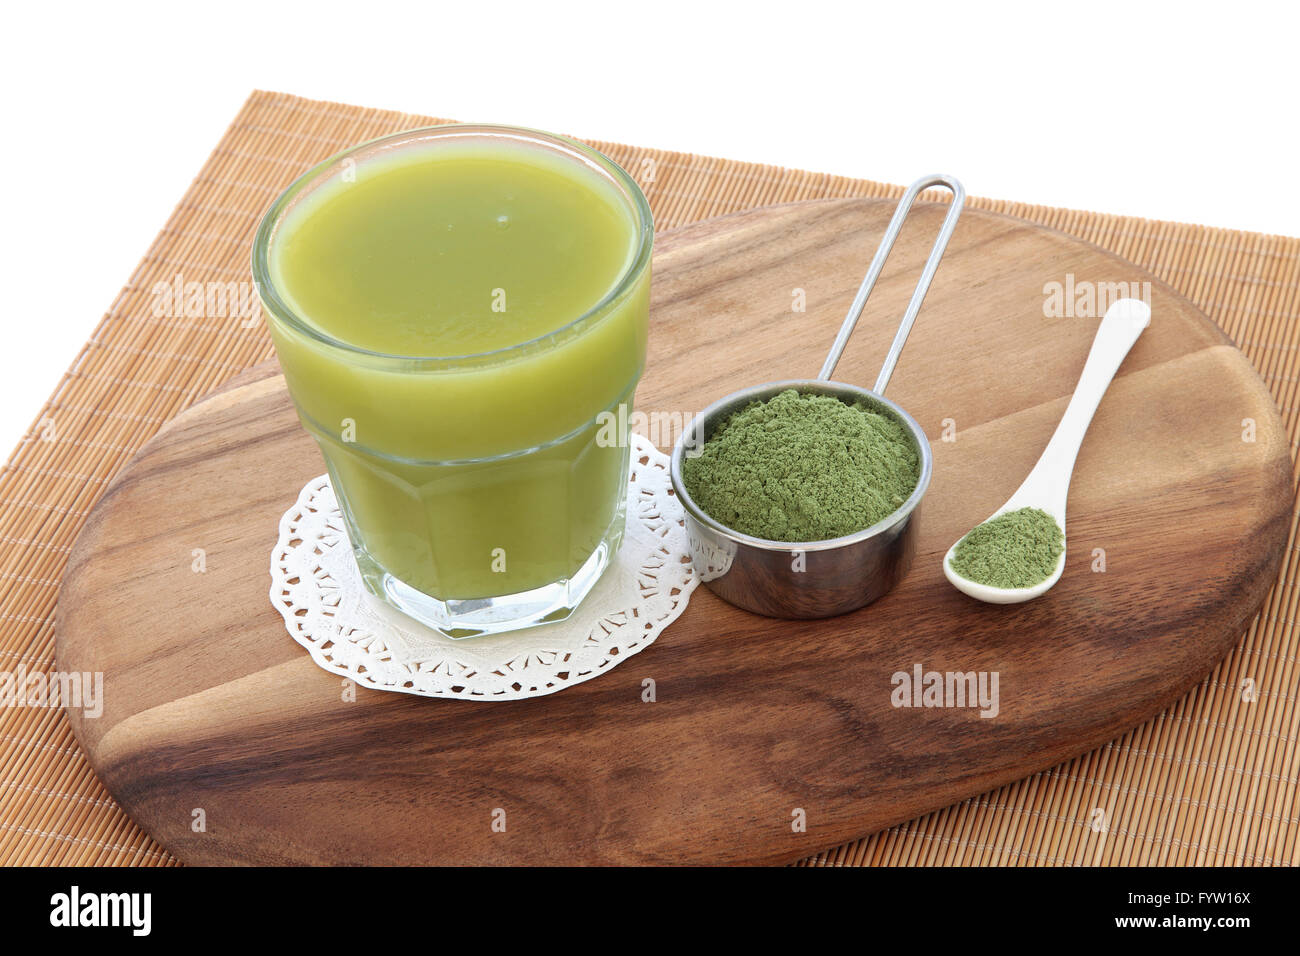 Wheat grass health drink with powder in scoop and spoon on a maple wood board over bamboo and white background. Stock Photo